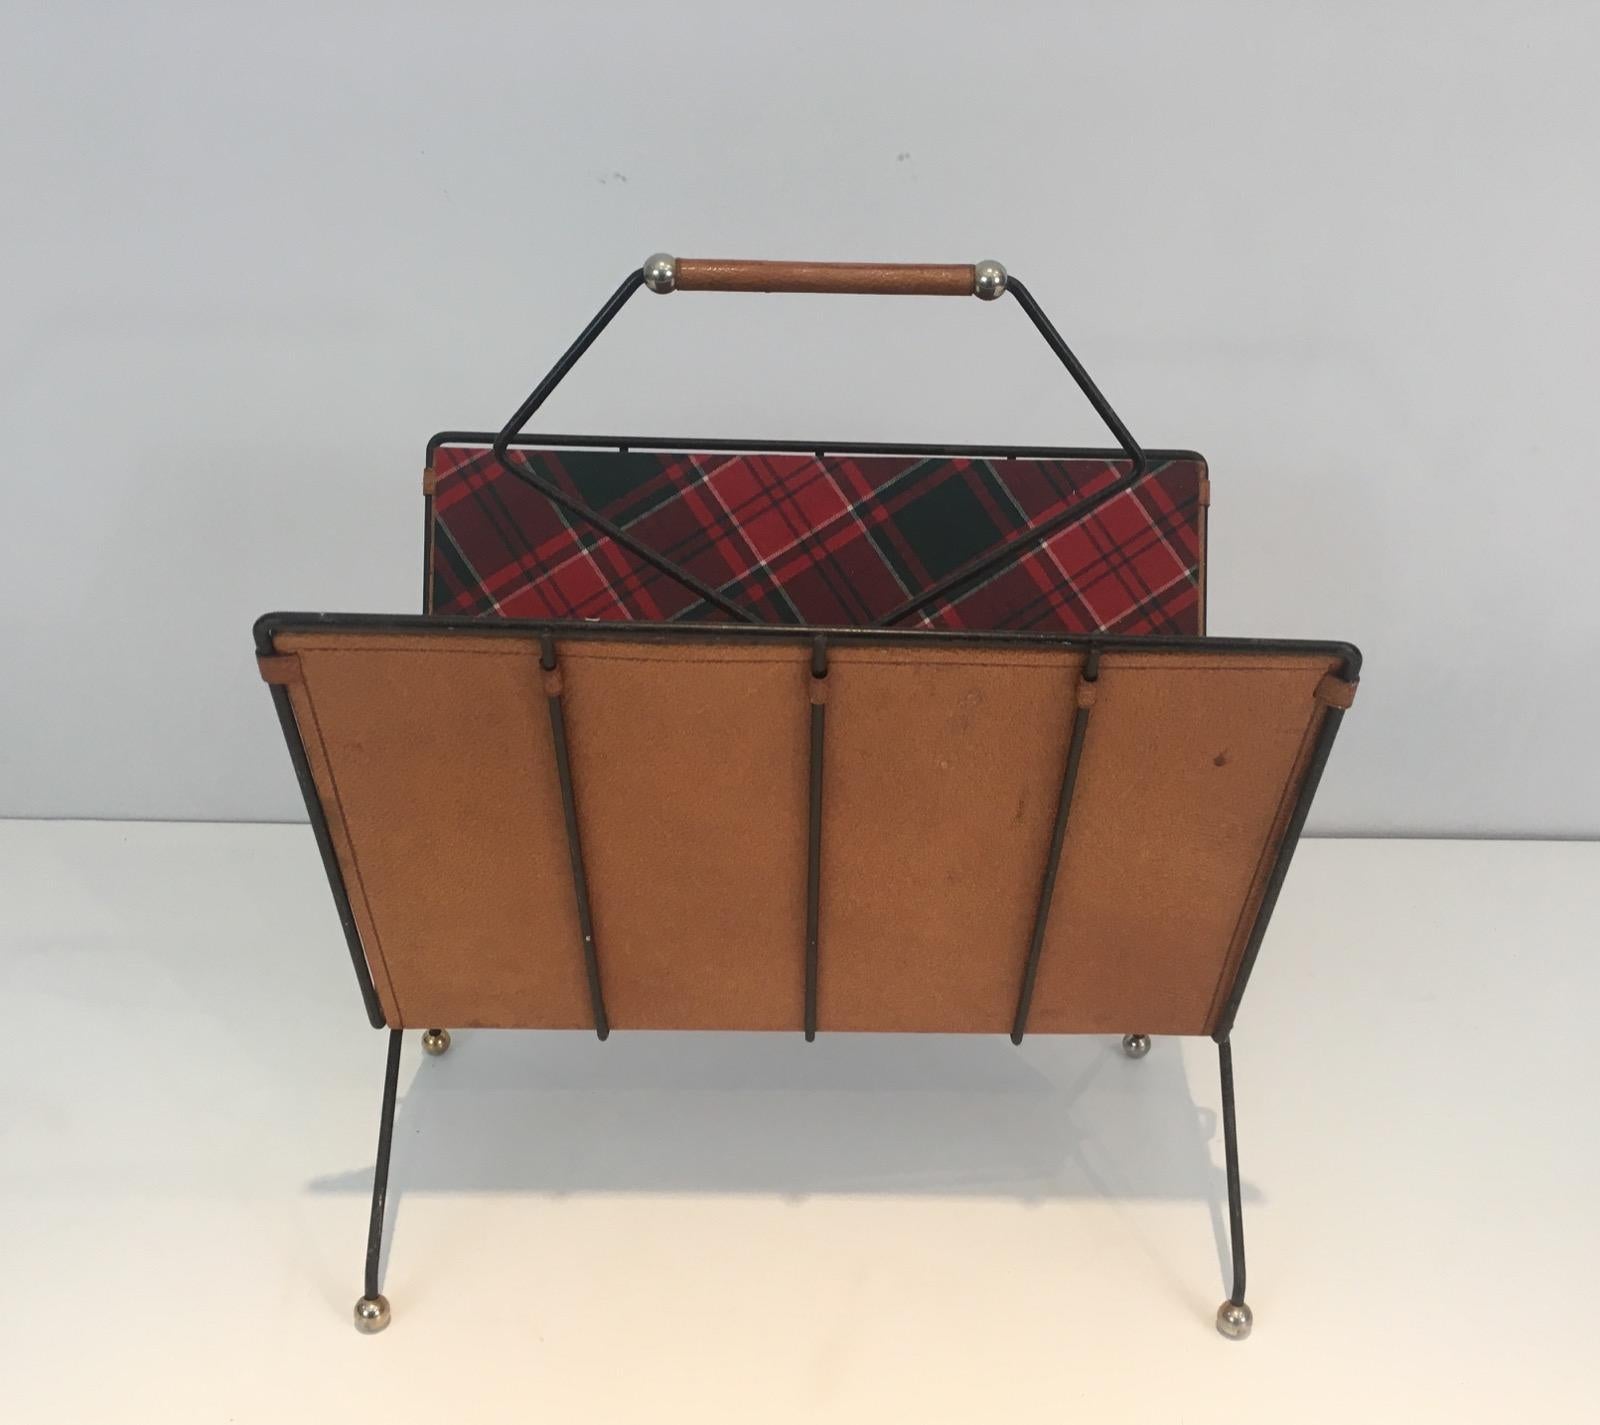 This rare magazine rack is made of fabric and leather on a black lacquered metal base, plaid fabric. This is a very nice French work, circa 1950.